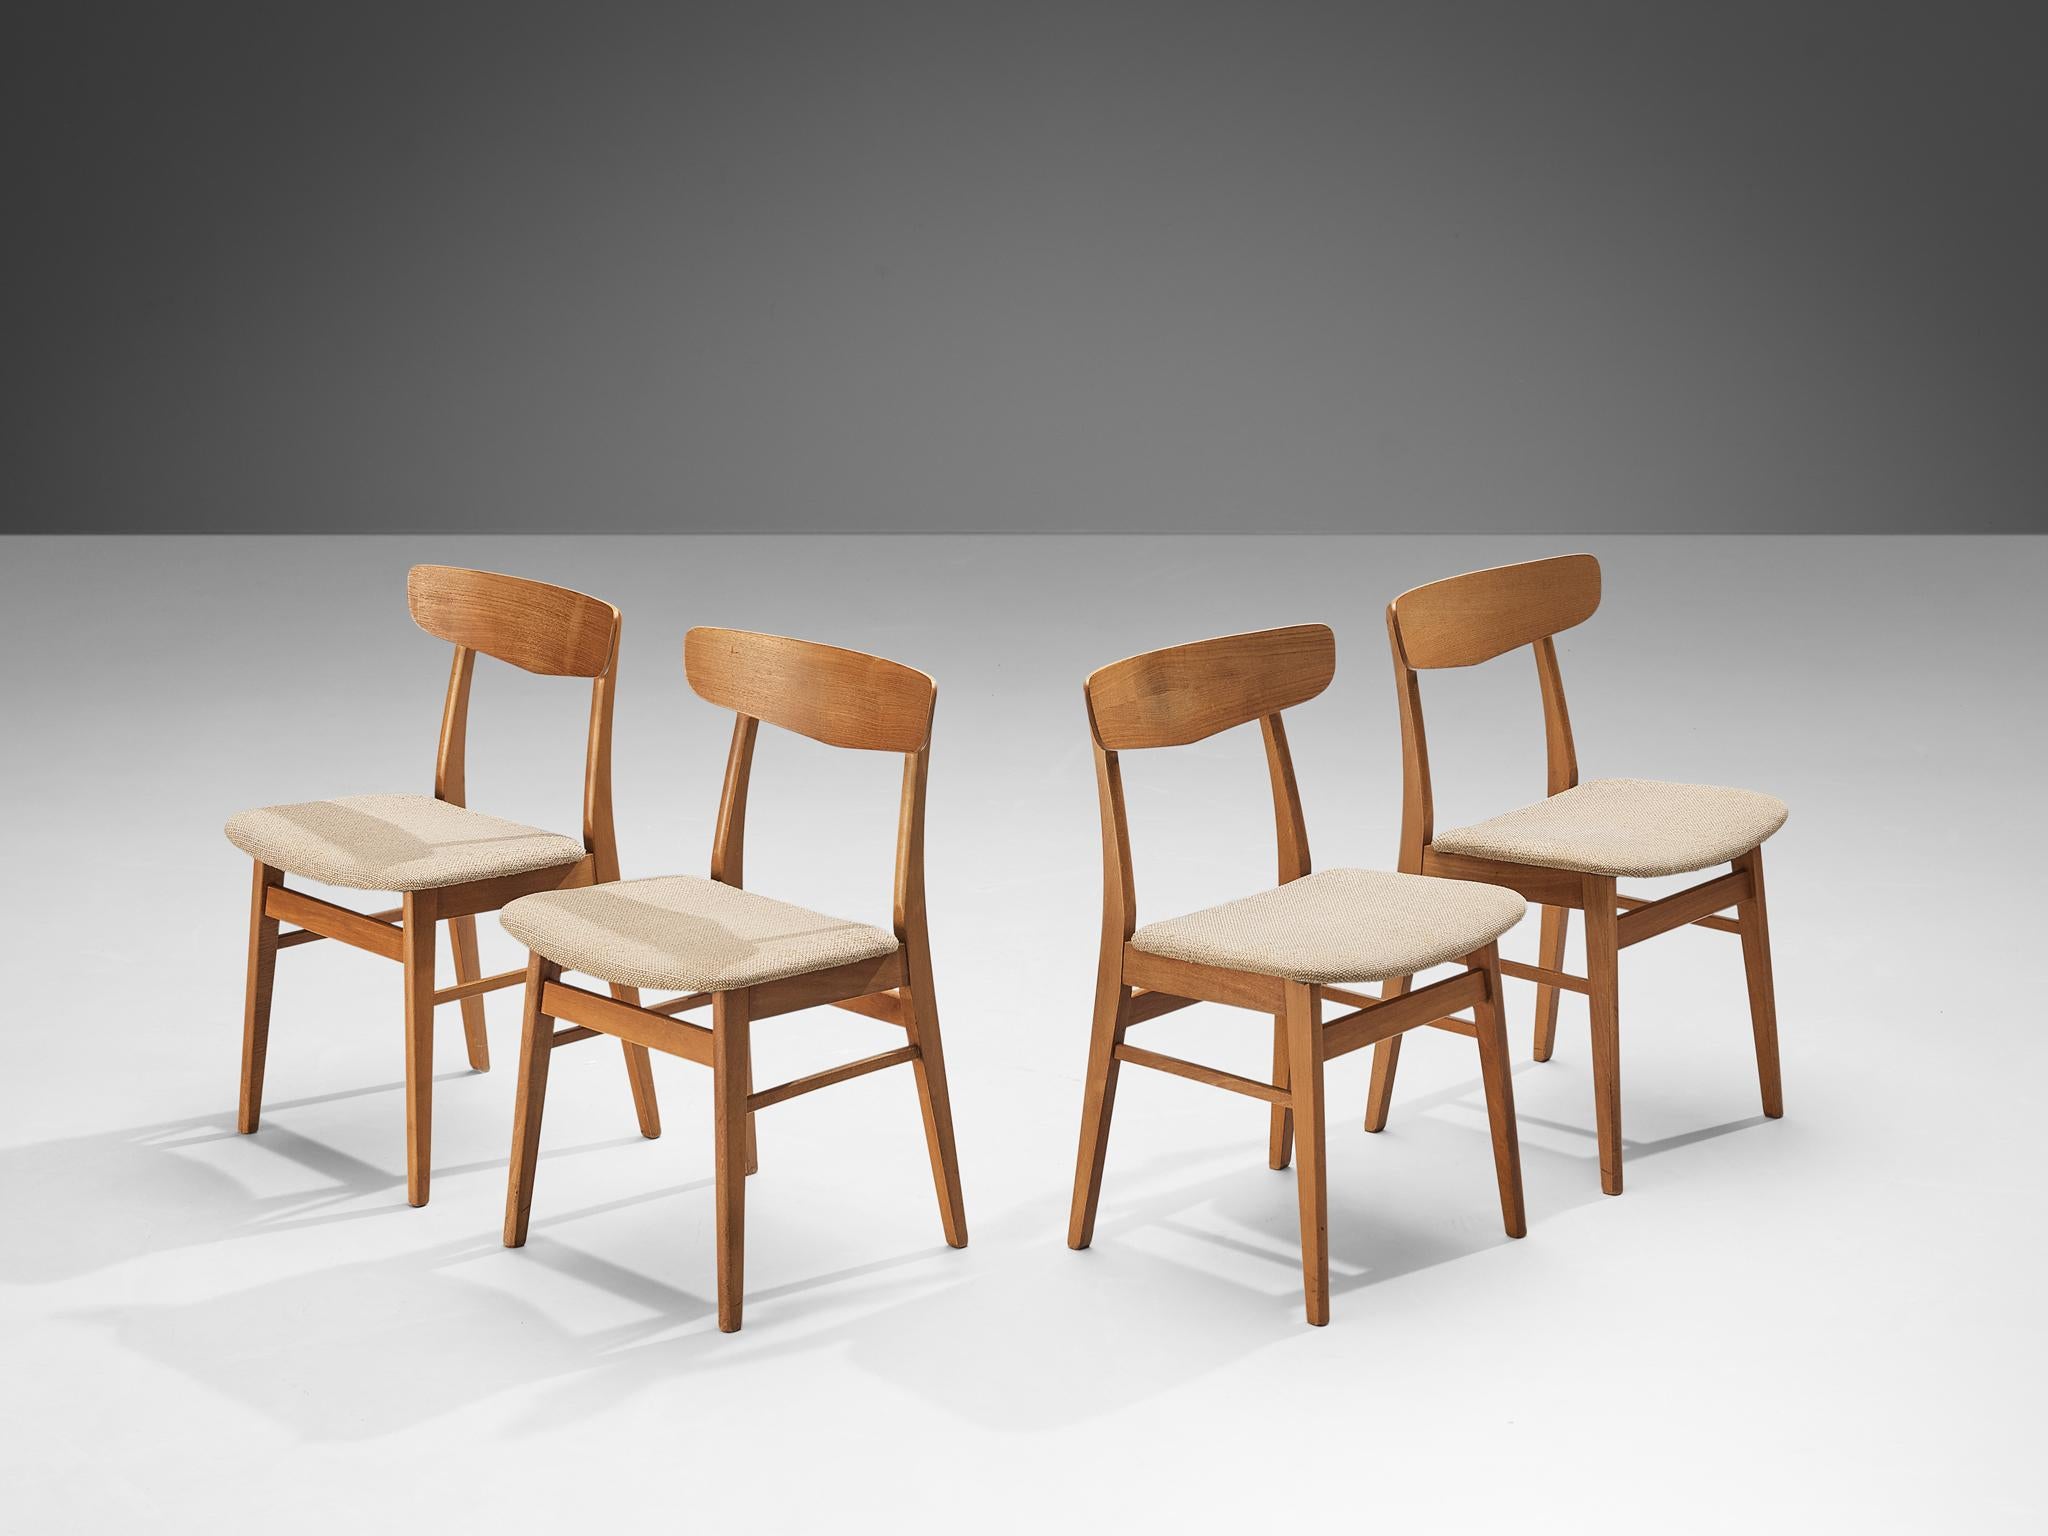 Dining chairs, teak, beech, fabric, Denmark, 1960s

These Danish dining chairs display a convincing aesthetic typical of the 1960s Danish furniture style, reminiscent of the work of Hans J. Wegner. The design is well-proportioned and balanced,